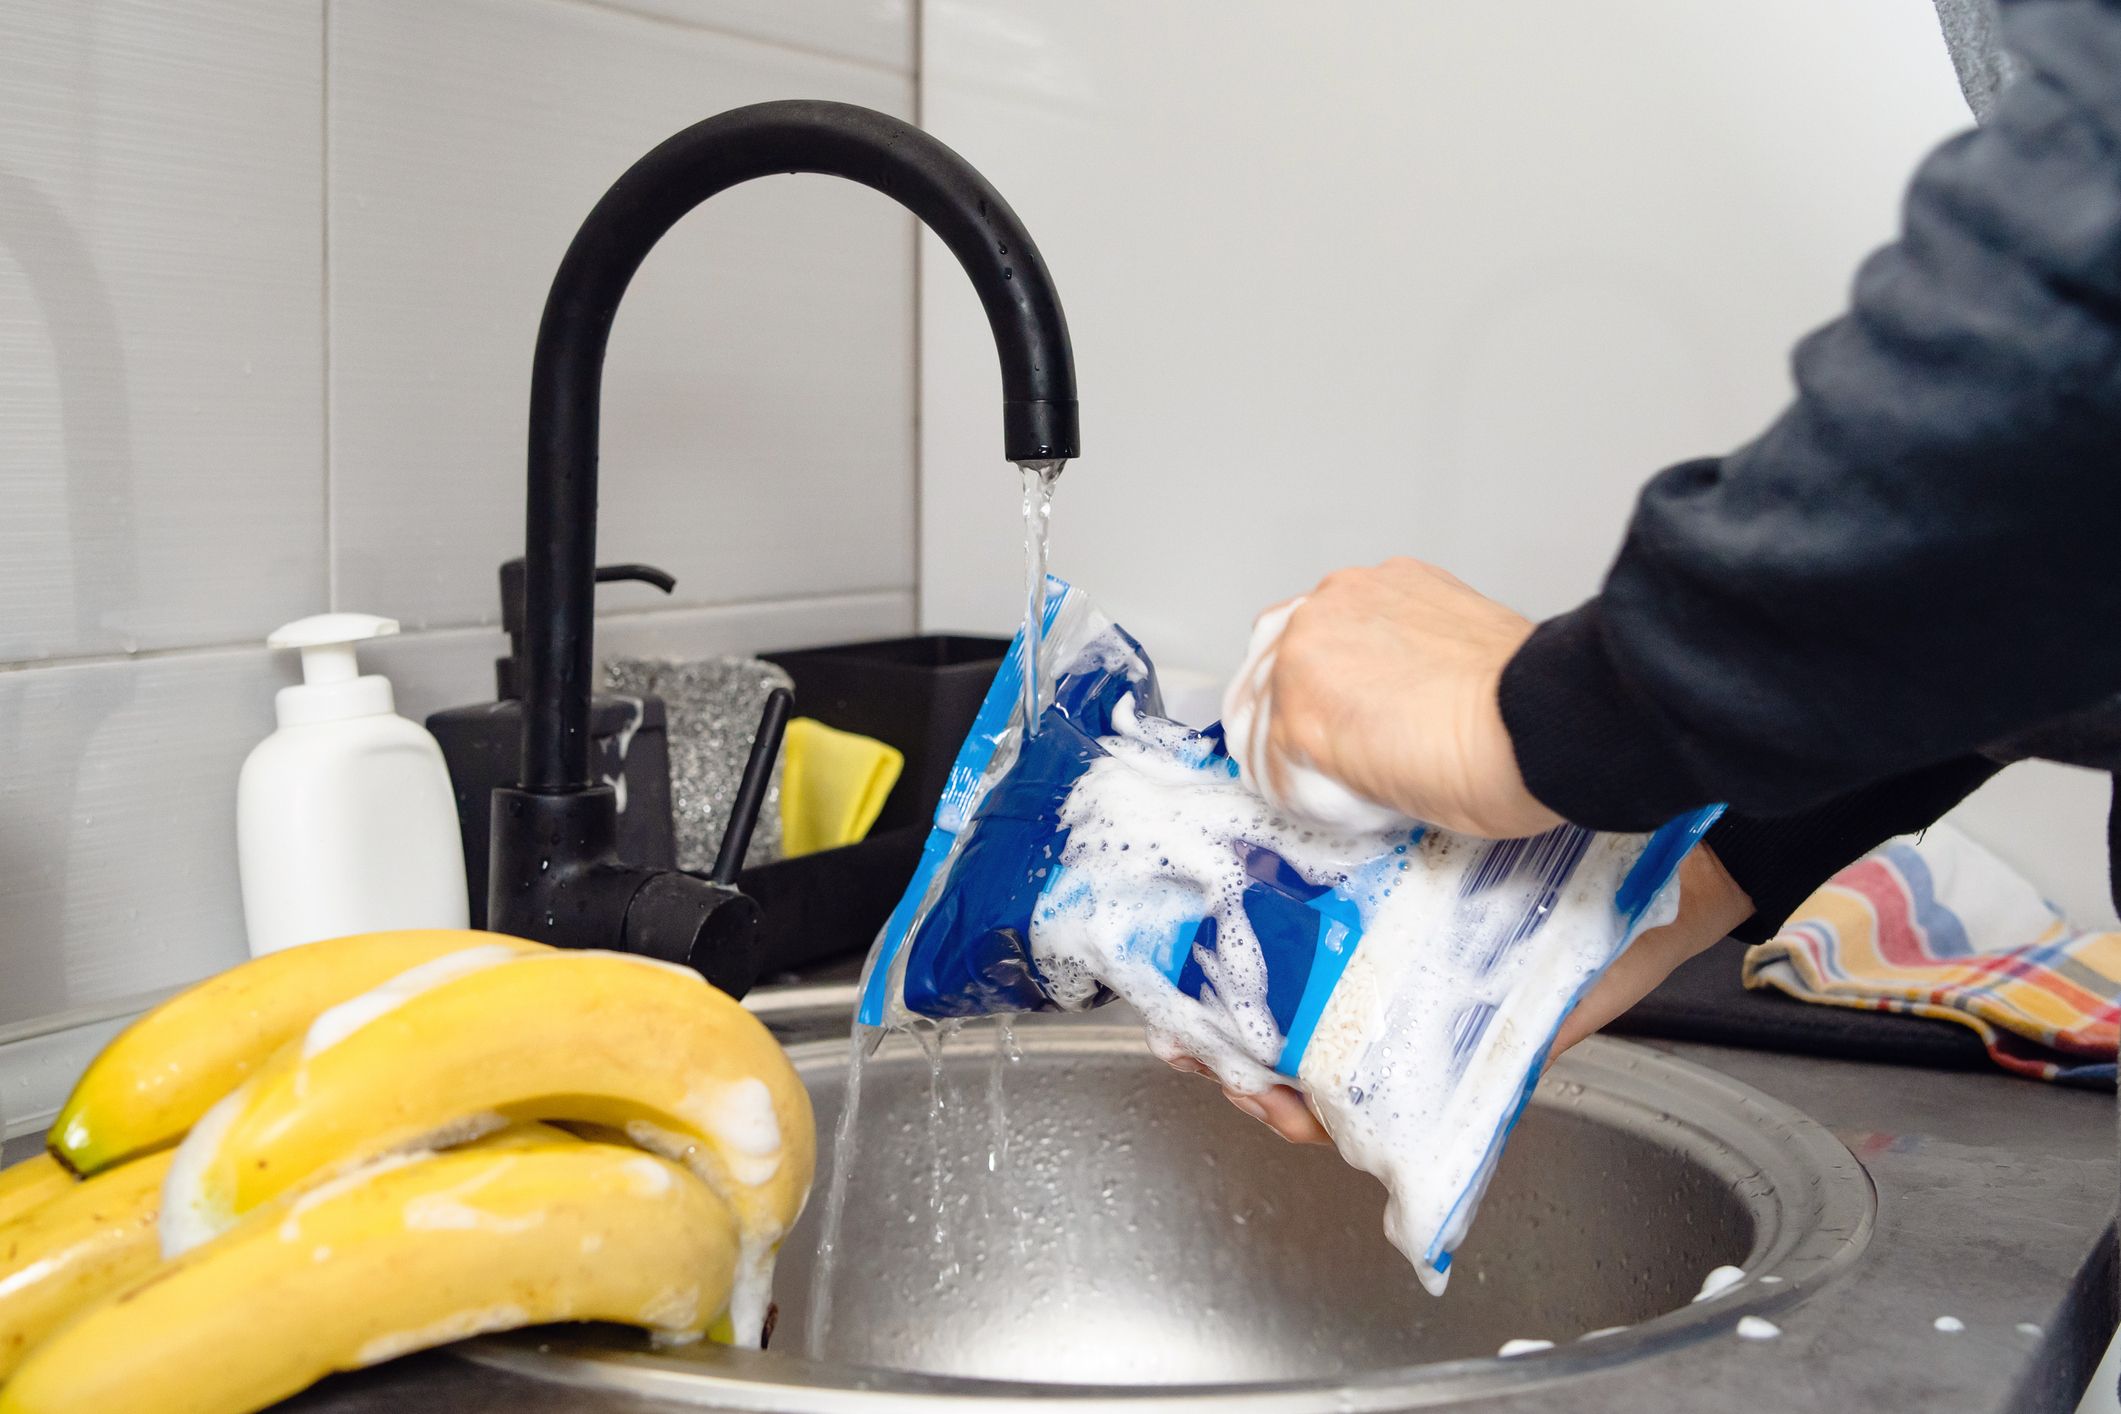 Still disinfecting groceries? Don't bother